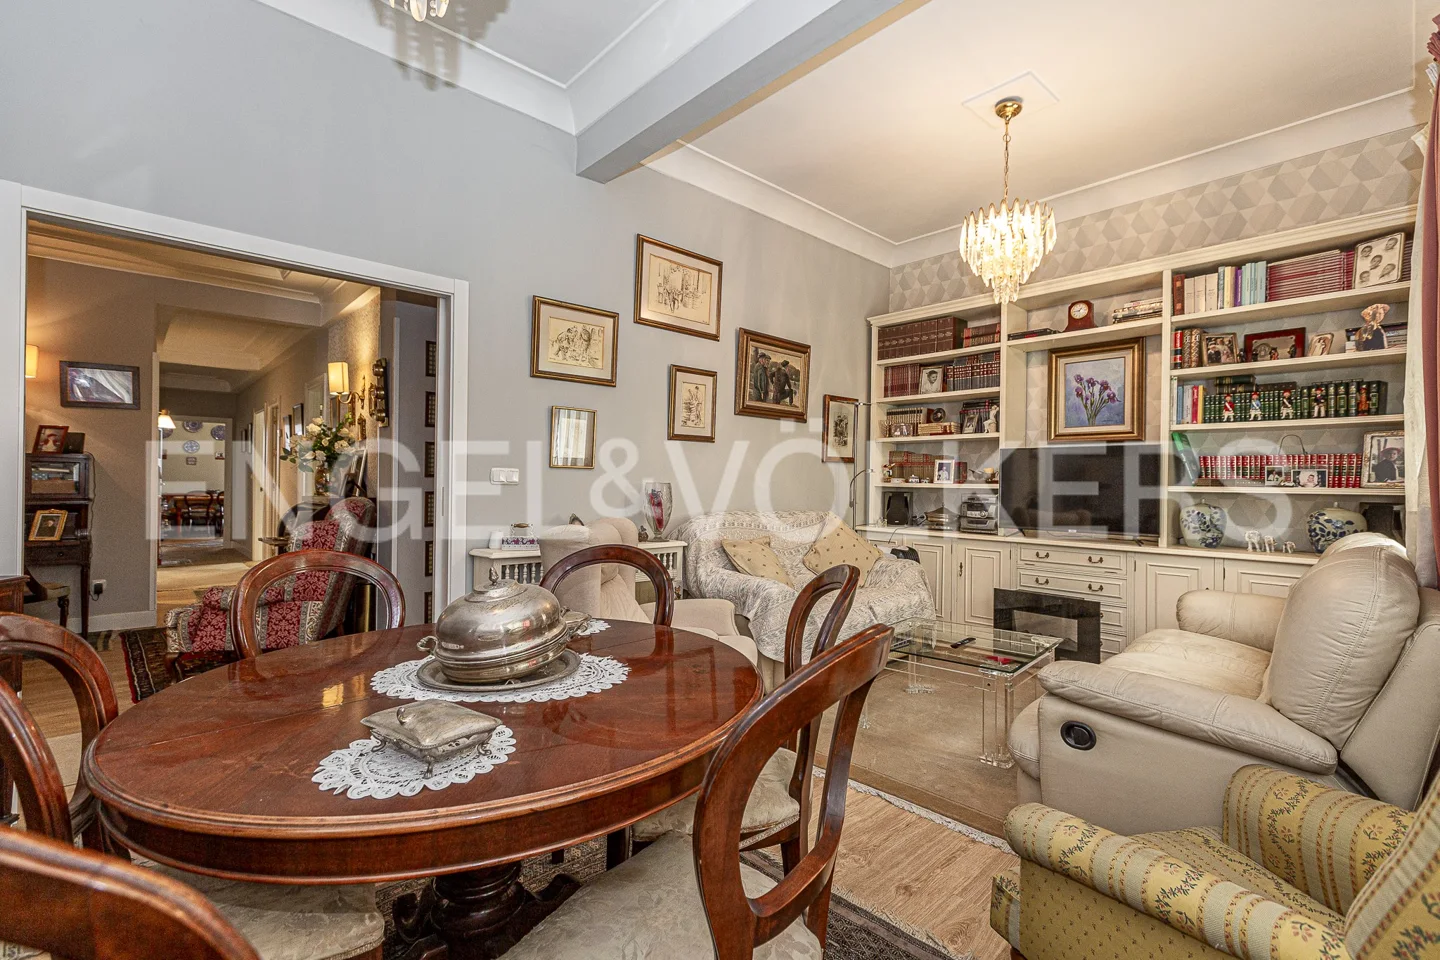 Magnificent apartment in the heart of Irun